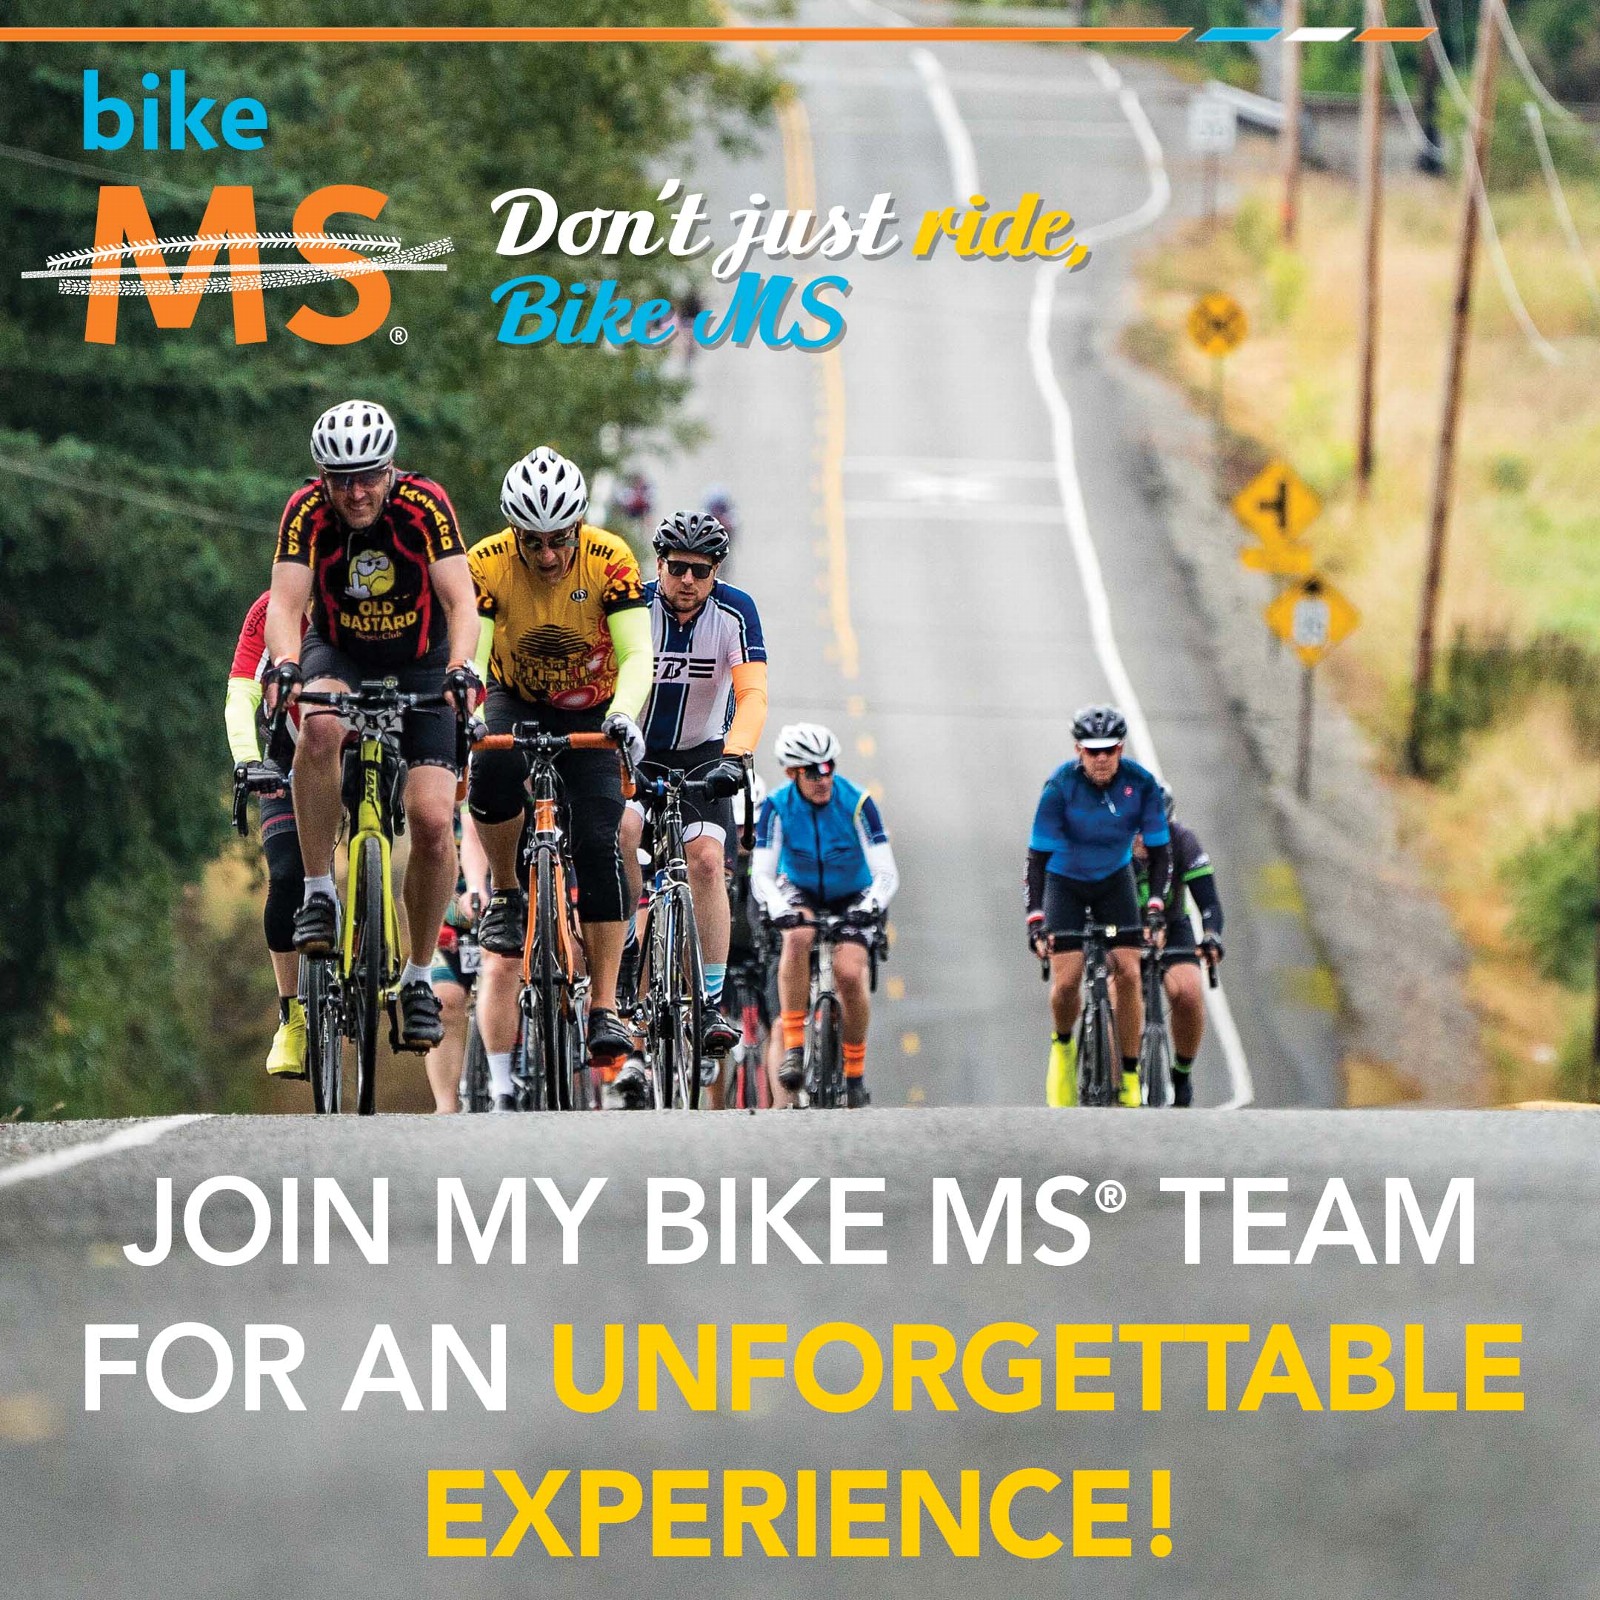 Join my Bike MS team for an unforgettable experience